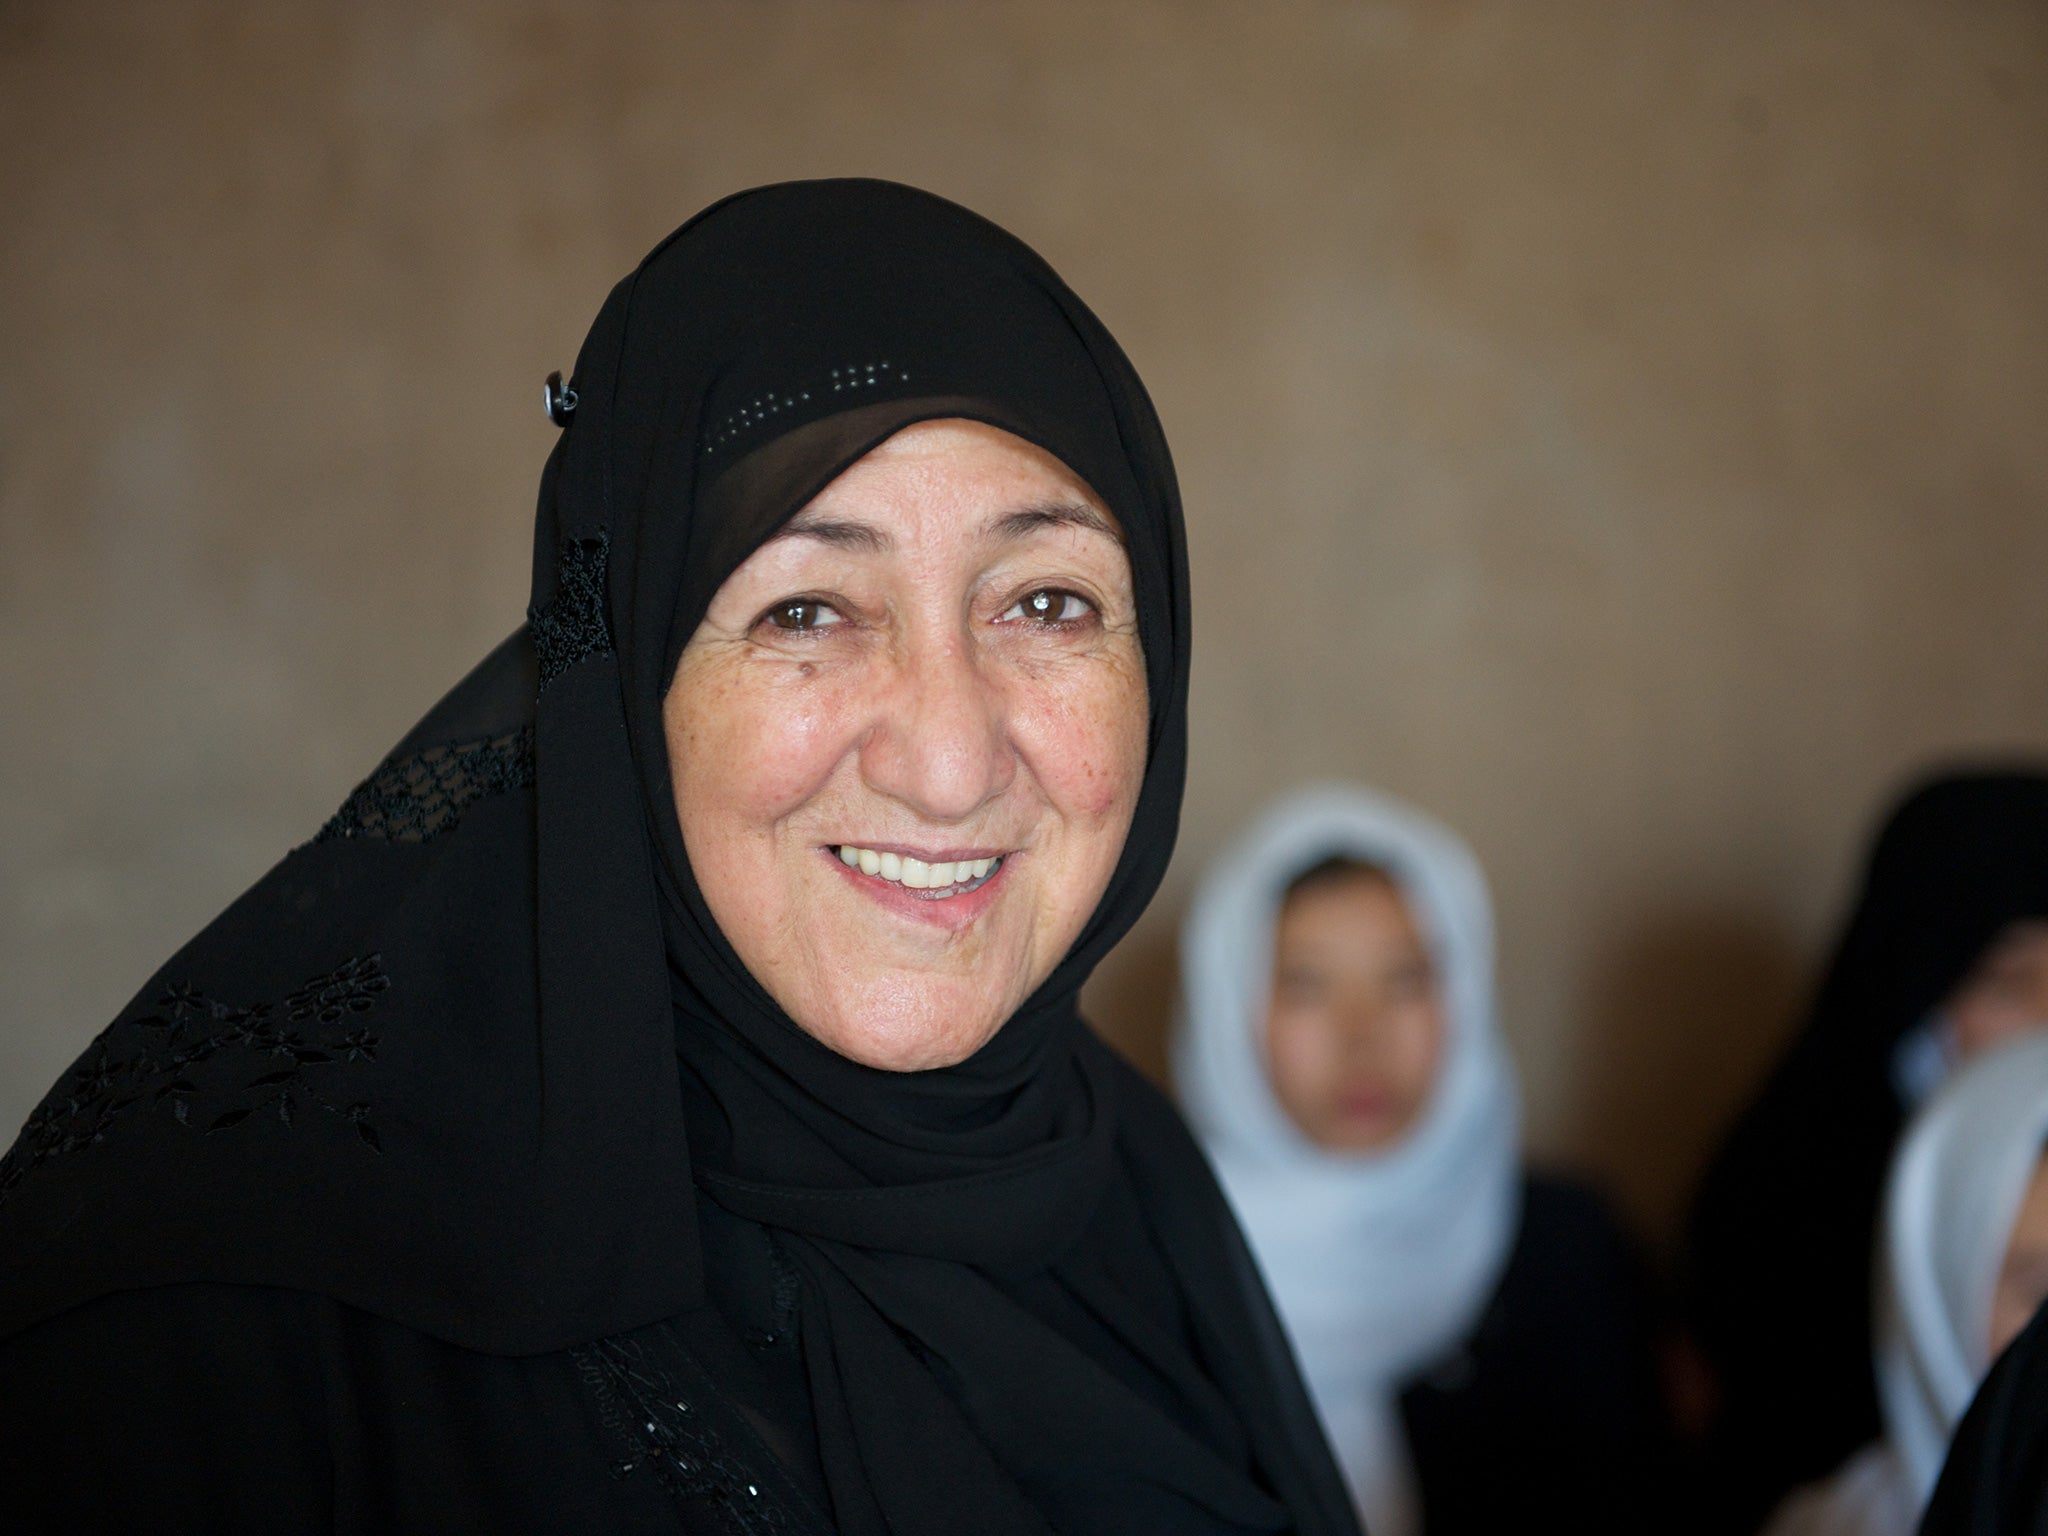 Dr Sakena Yacoobi has been awarded five honourary doctorates and won the Opus Prize in 2013